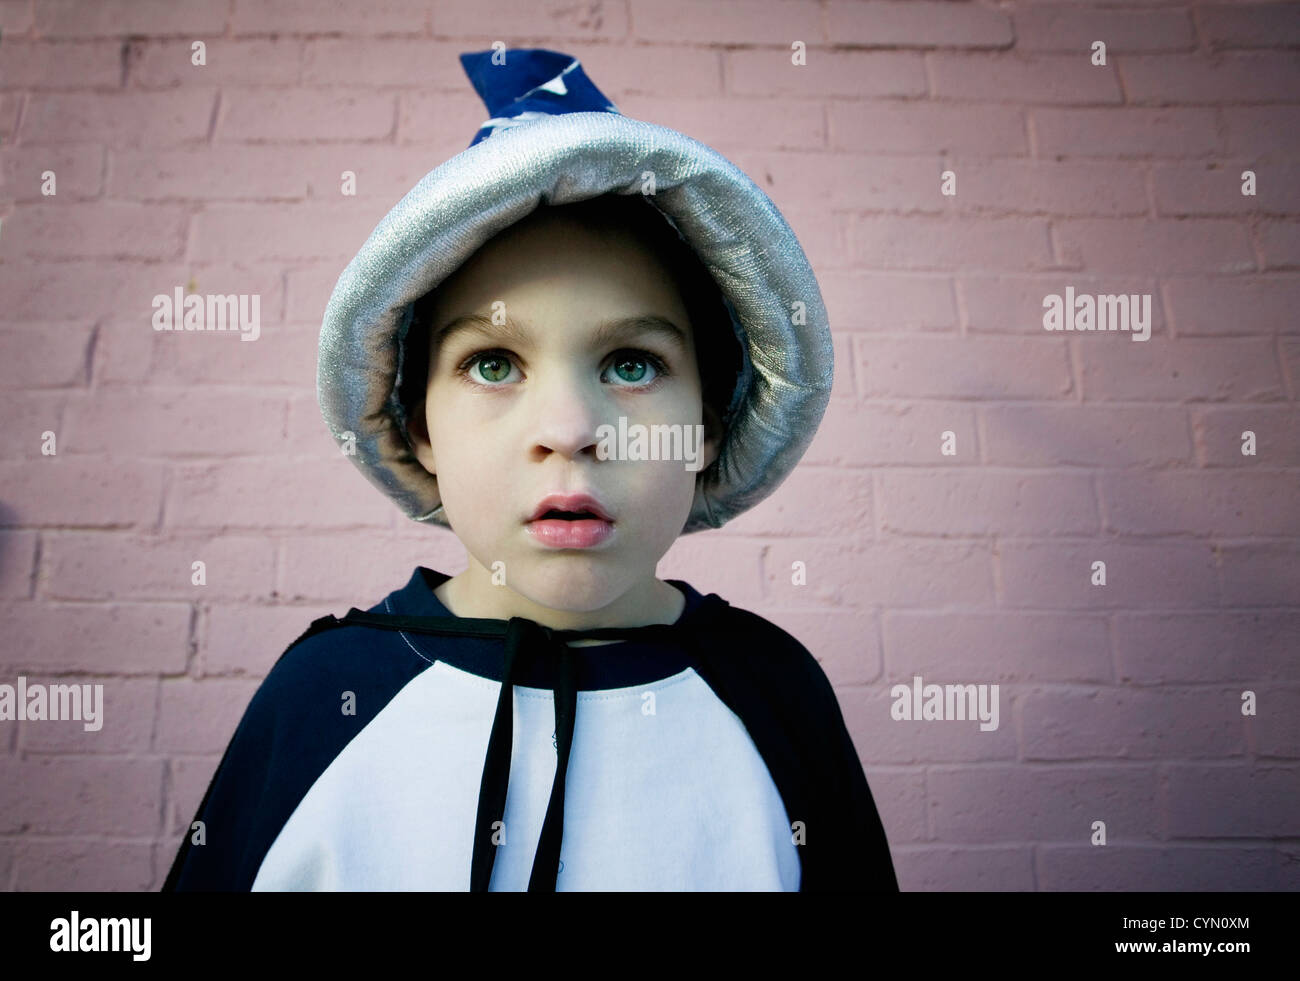 Close-up of a young boy in a wizard costume Stock Photo